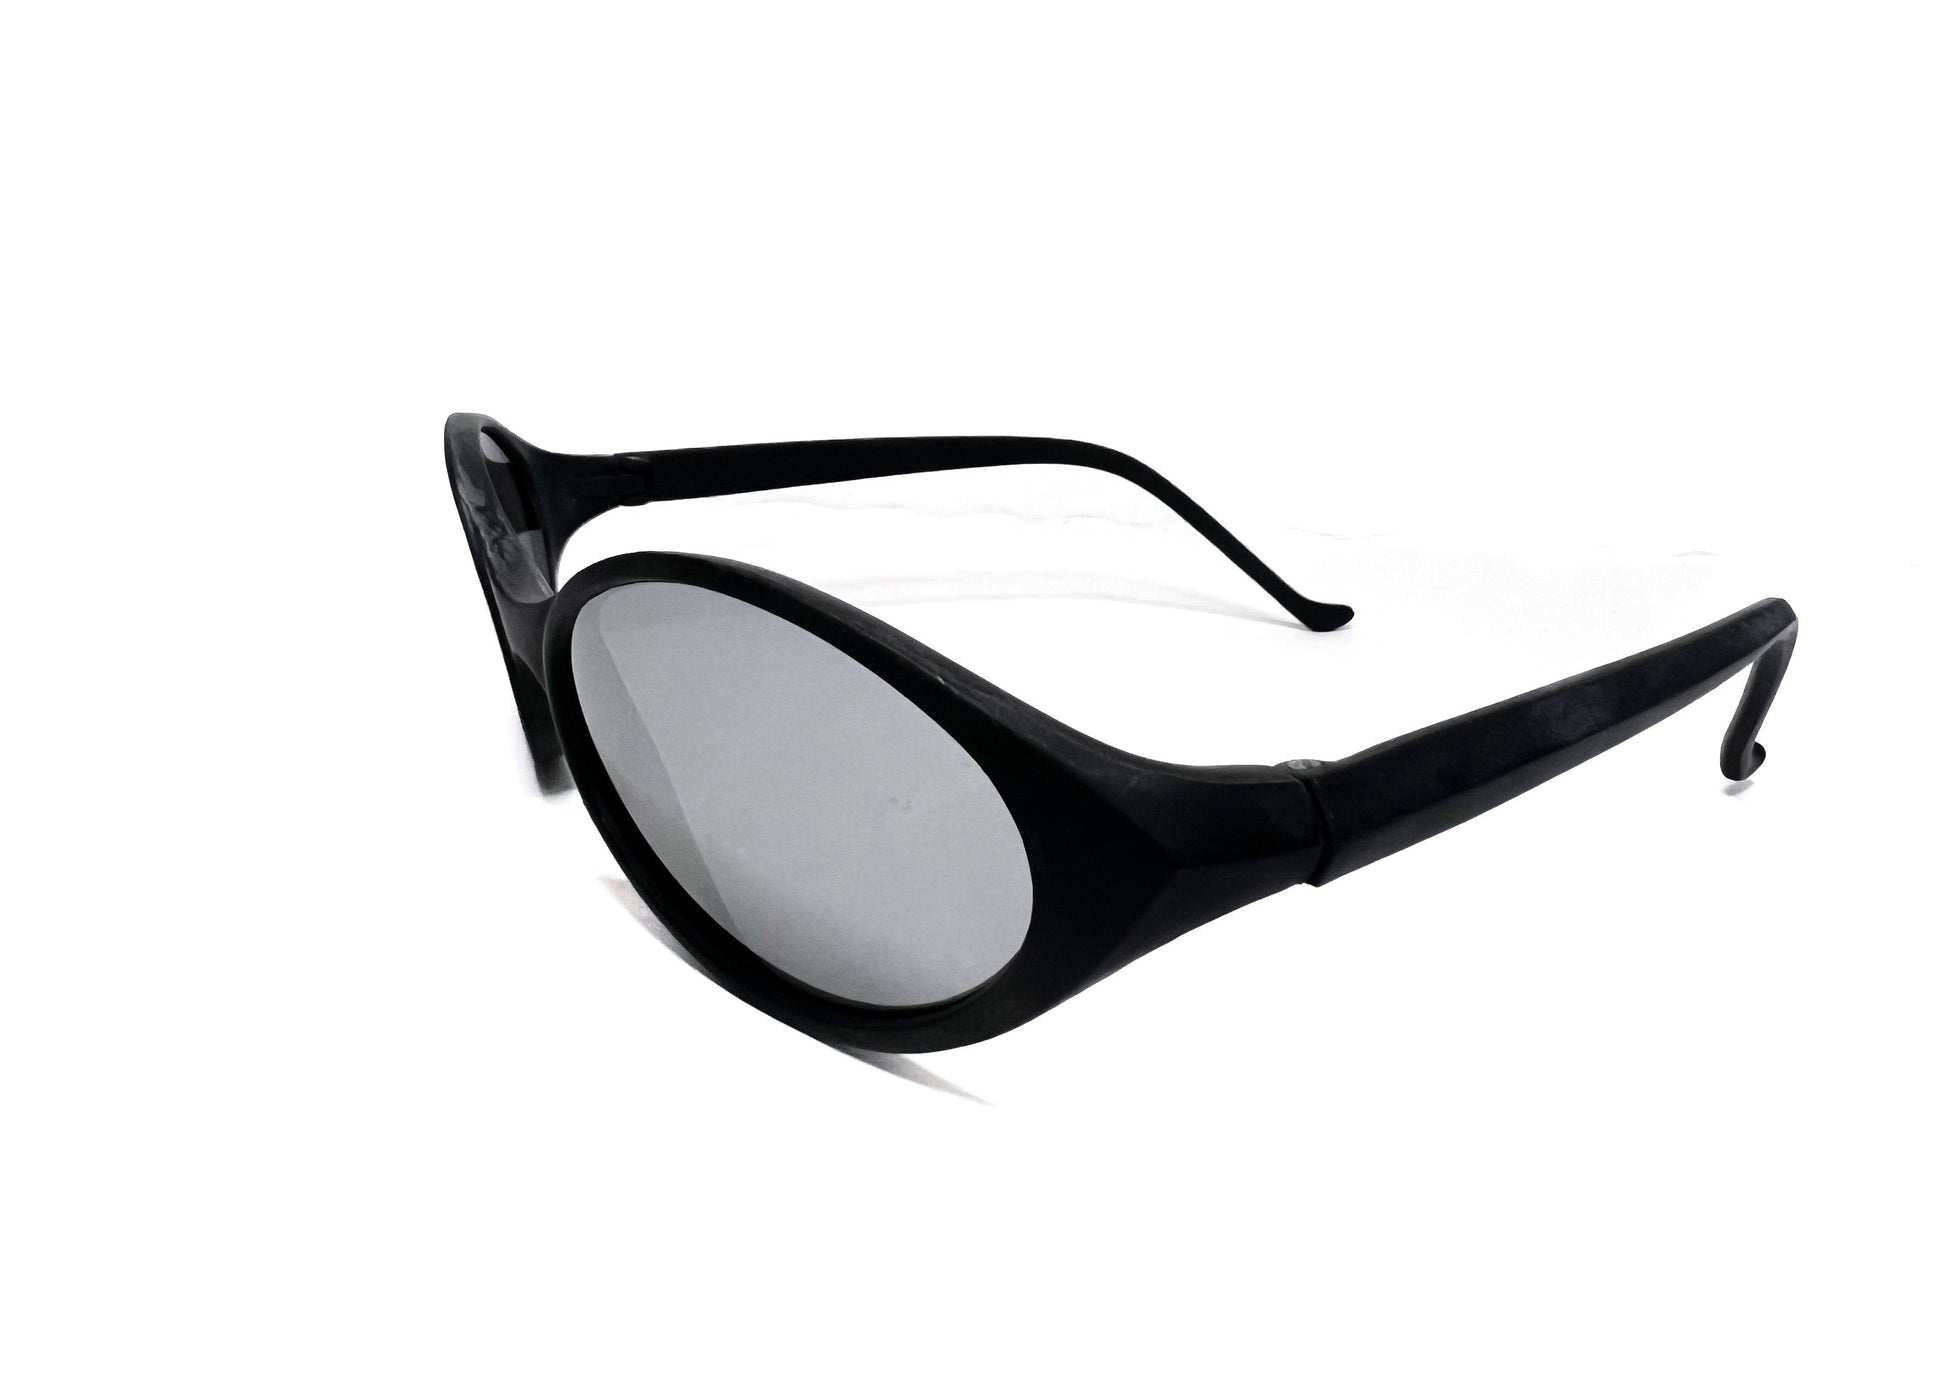 Chanel sunglasses with black textured square frame and black transparent  lenses